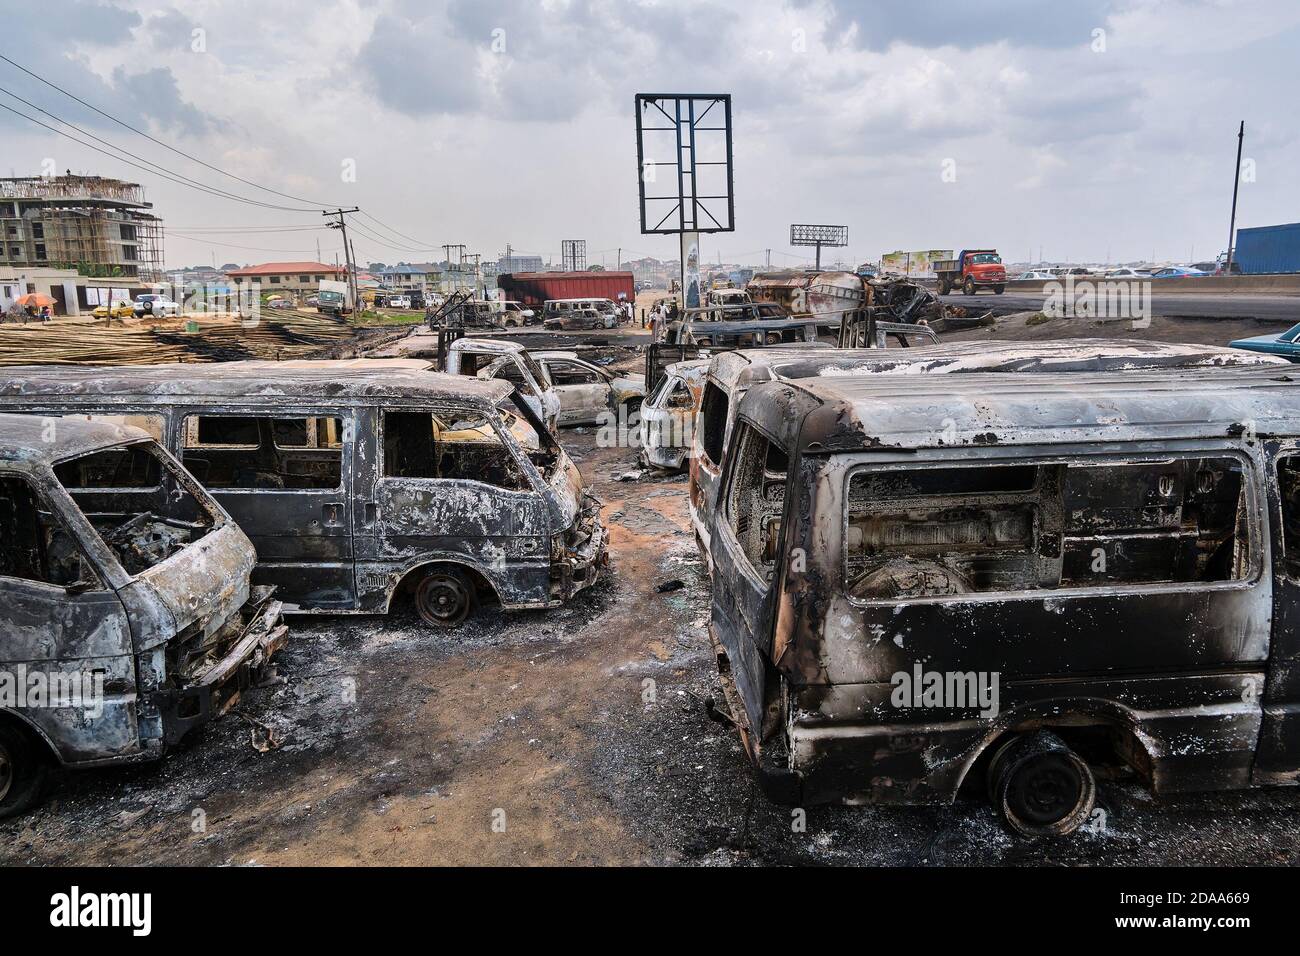 Damaged vehicles are seen at a site following an explosion after a tanker carrying fuel crashed at Kara Bridge along the Lagos-Ibadan highway. Eye-witnesses claim 3 people were burnt to death, vehicles parked at a bus station and some for sale at a lot were burnt in the accident which happened around 2am after a fuel-laden tanker exploded after losing its tires. Lagos, Nigeria. November 7, 2020. Stock Photo